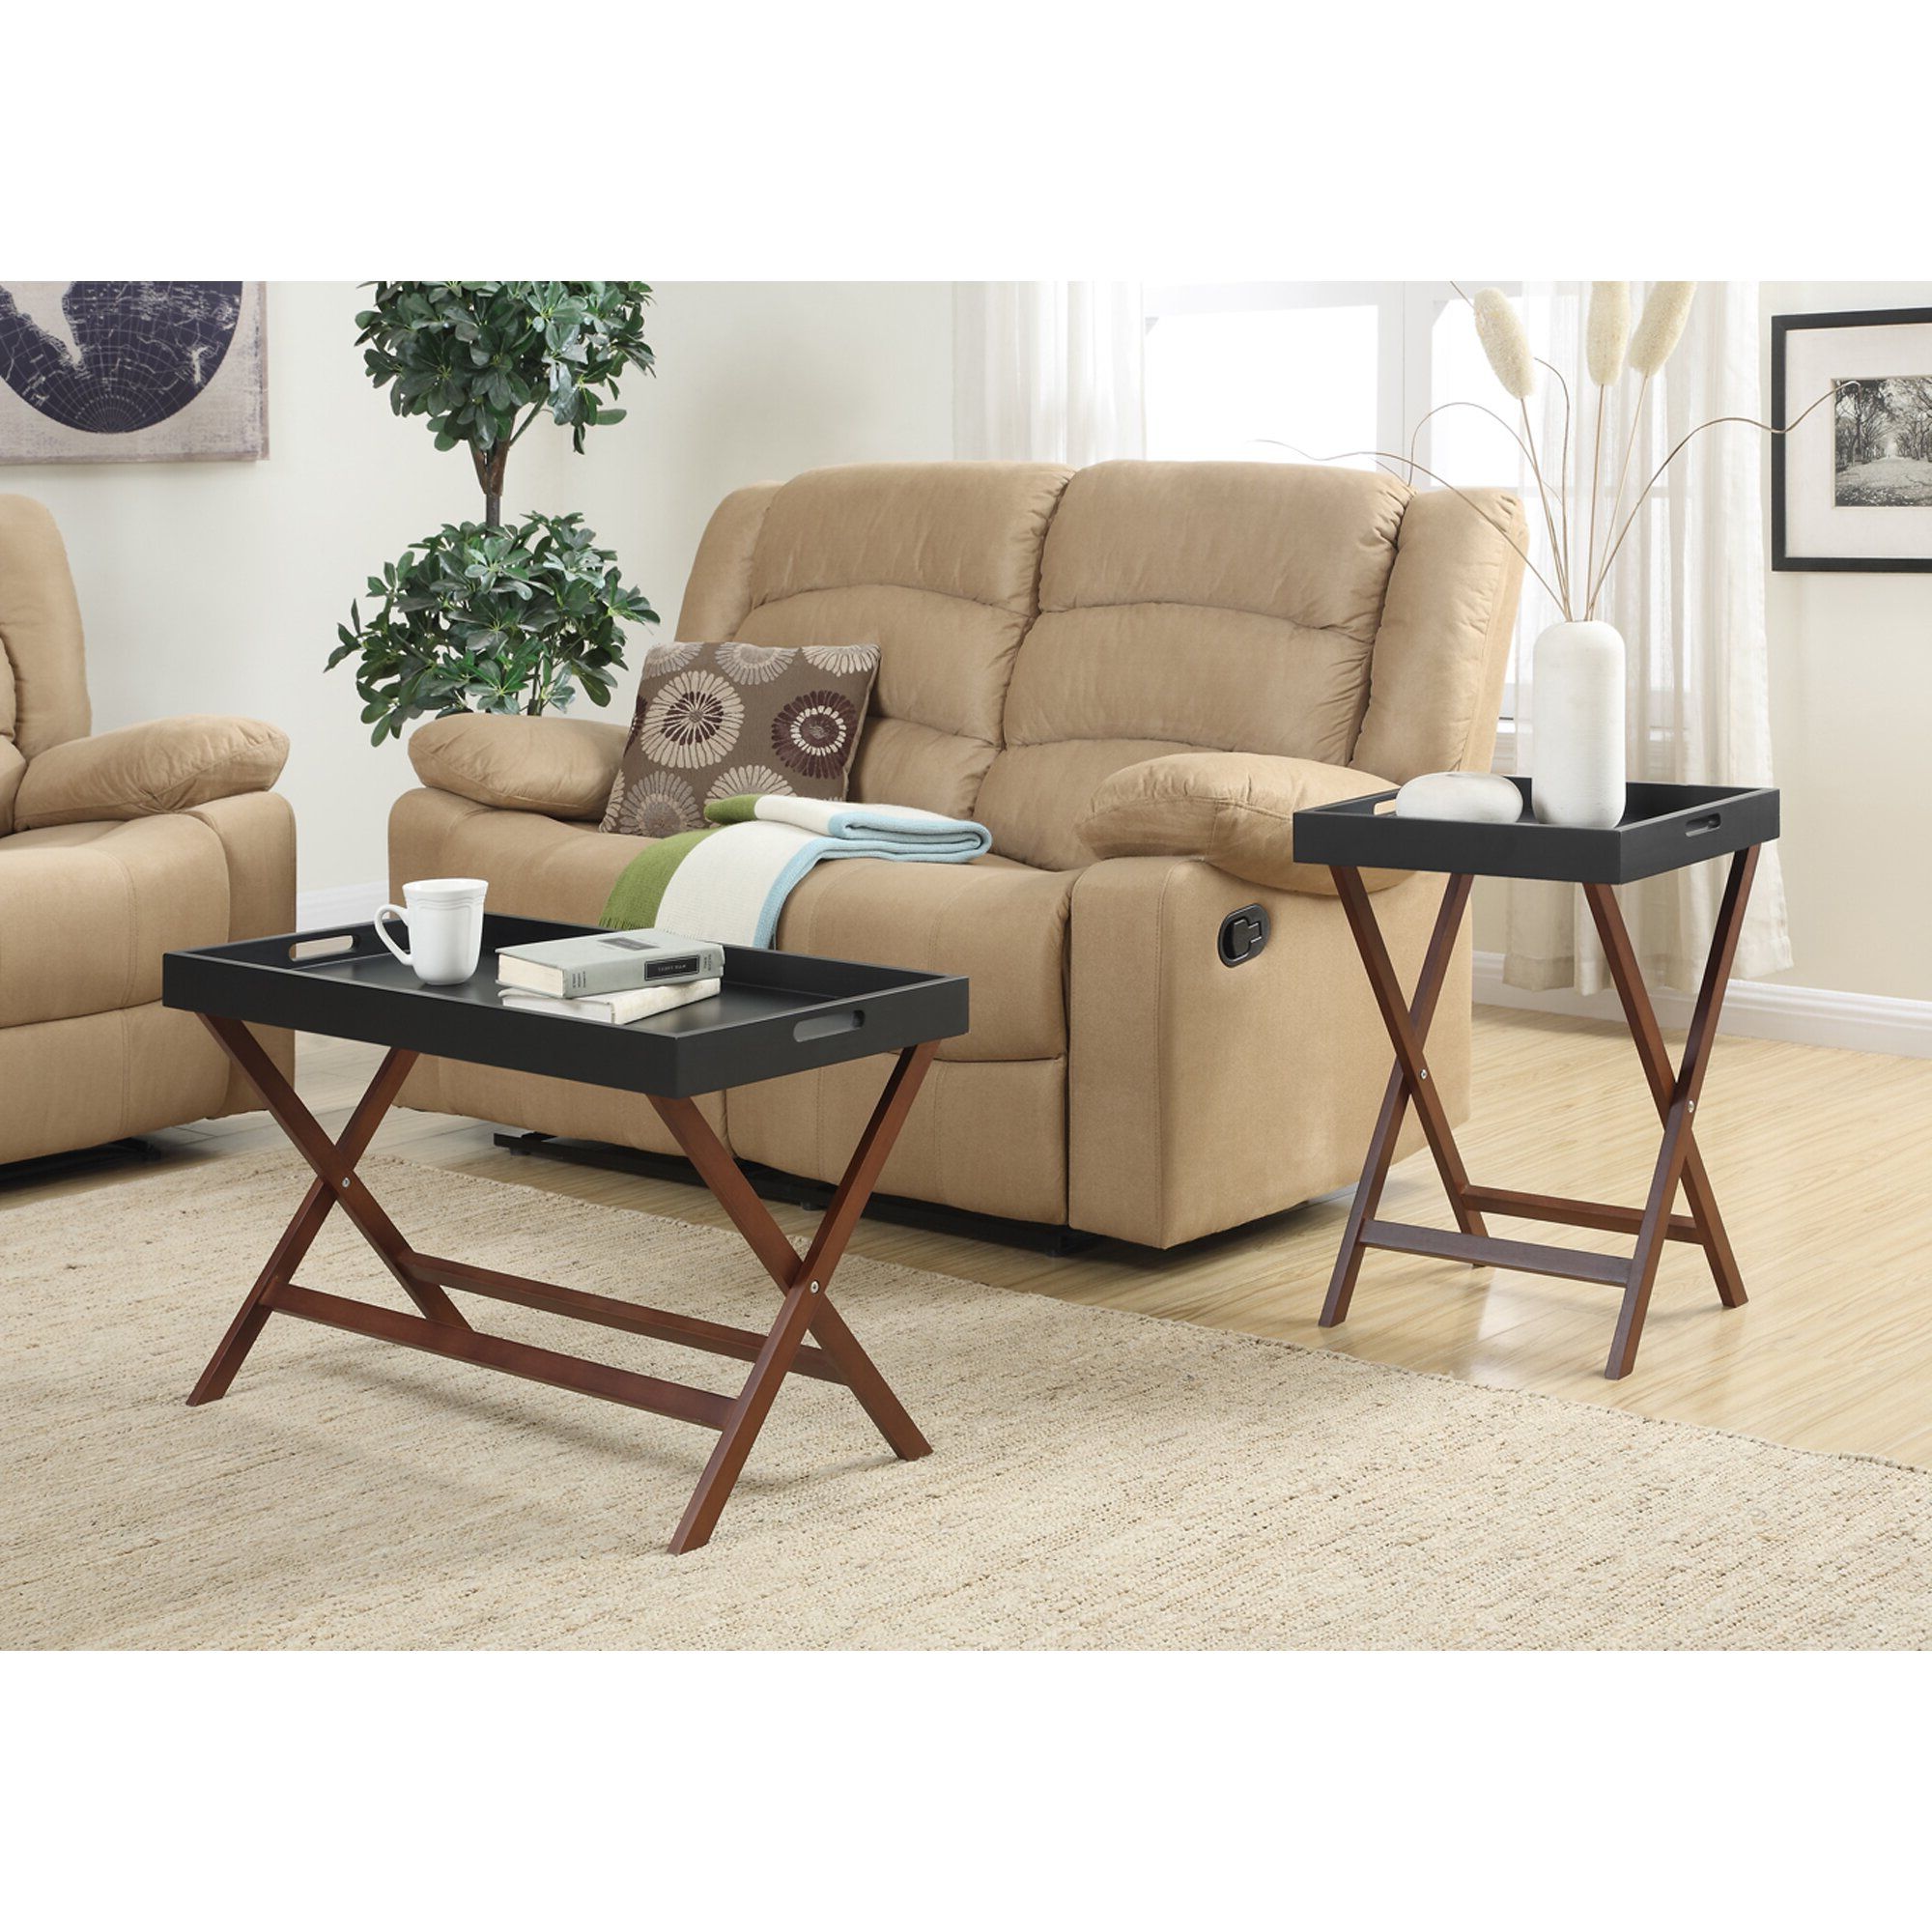 Lockheart Coffee Table With Removable Tray | Wayfair For Detachable Tray Coffee Tables (View 3 of 20)